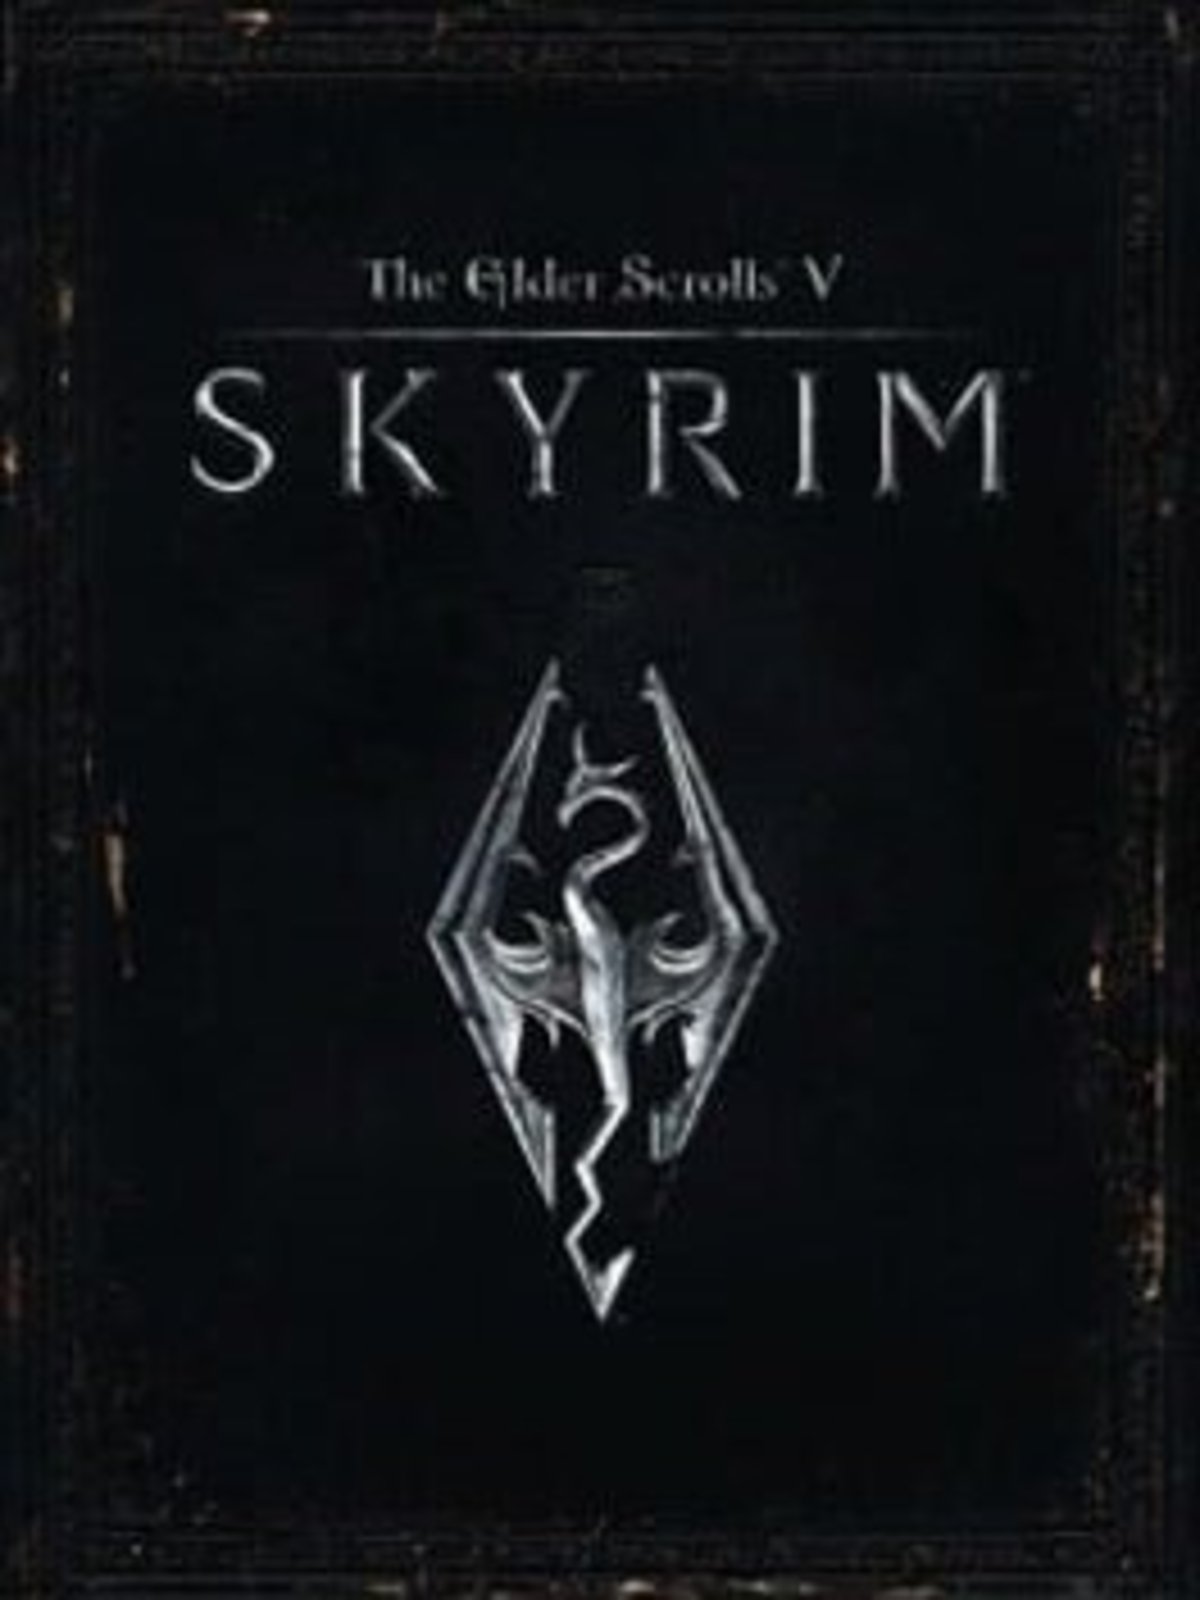 A gamer has paid $ 600 for a copy of Skyrim on Xbox 360